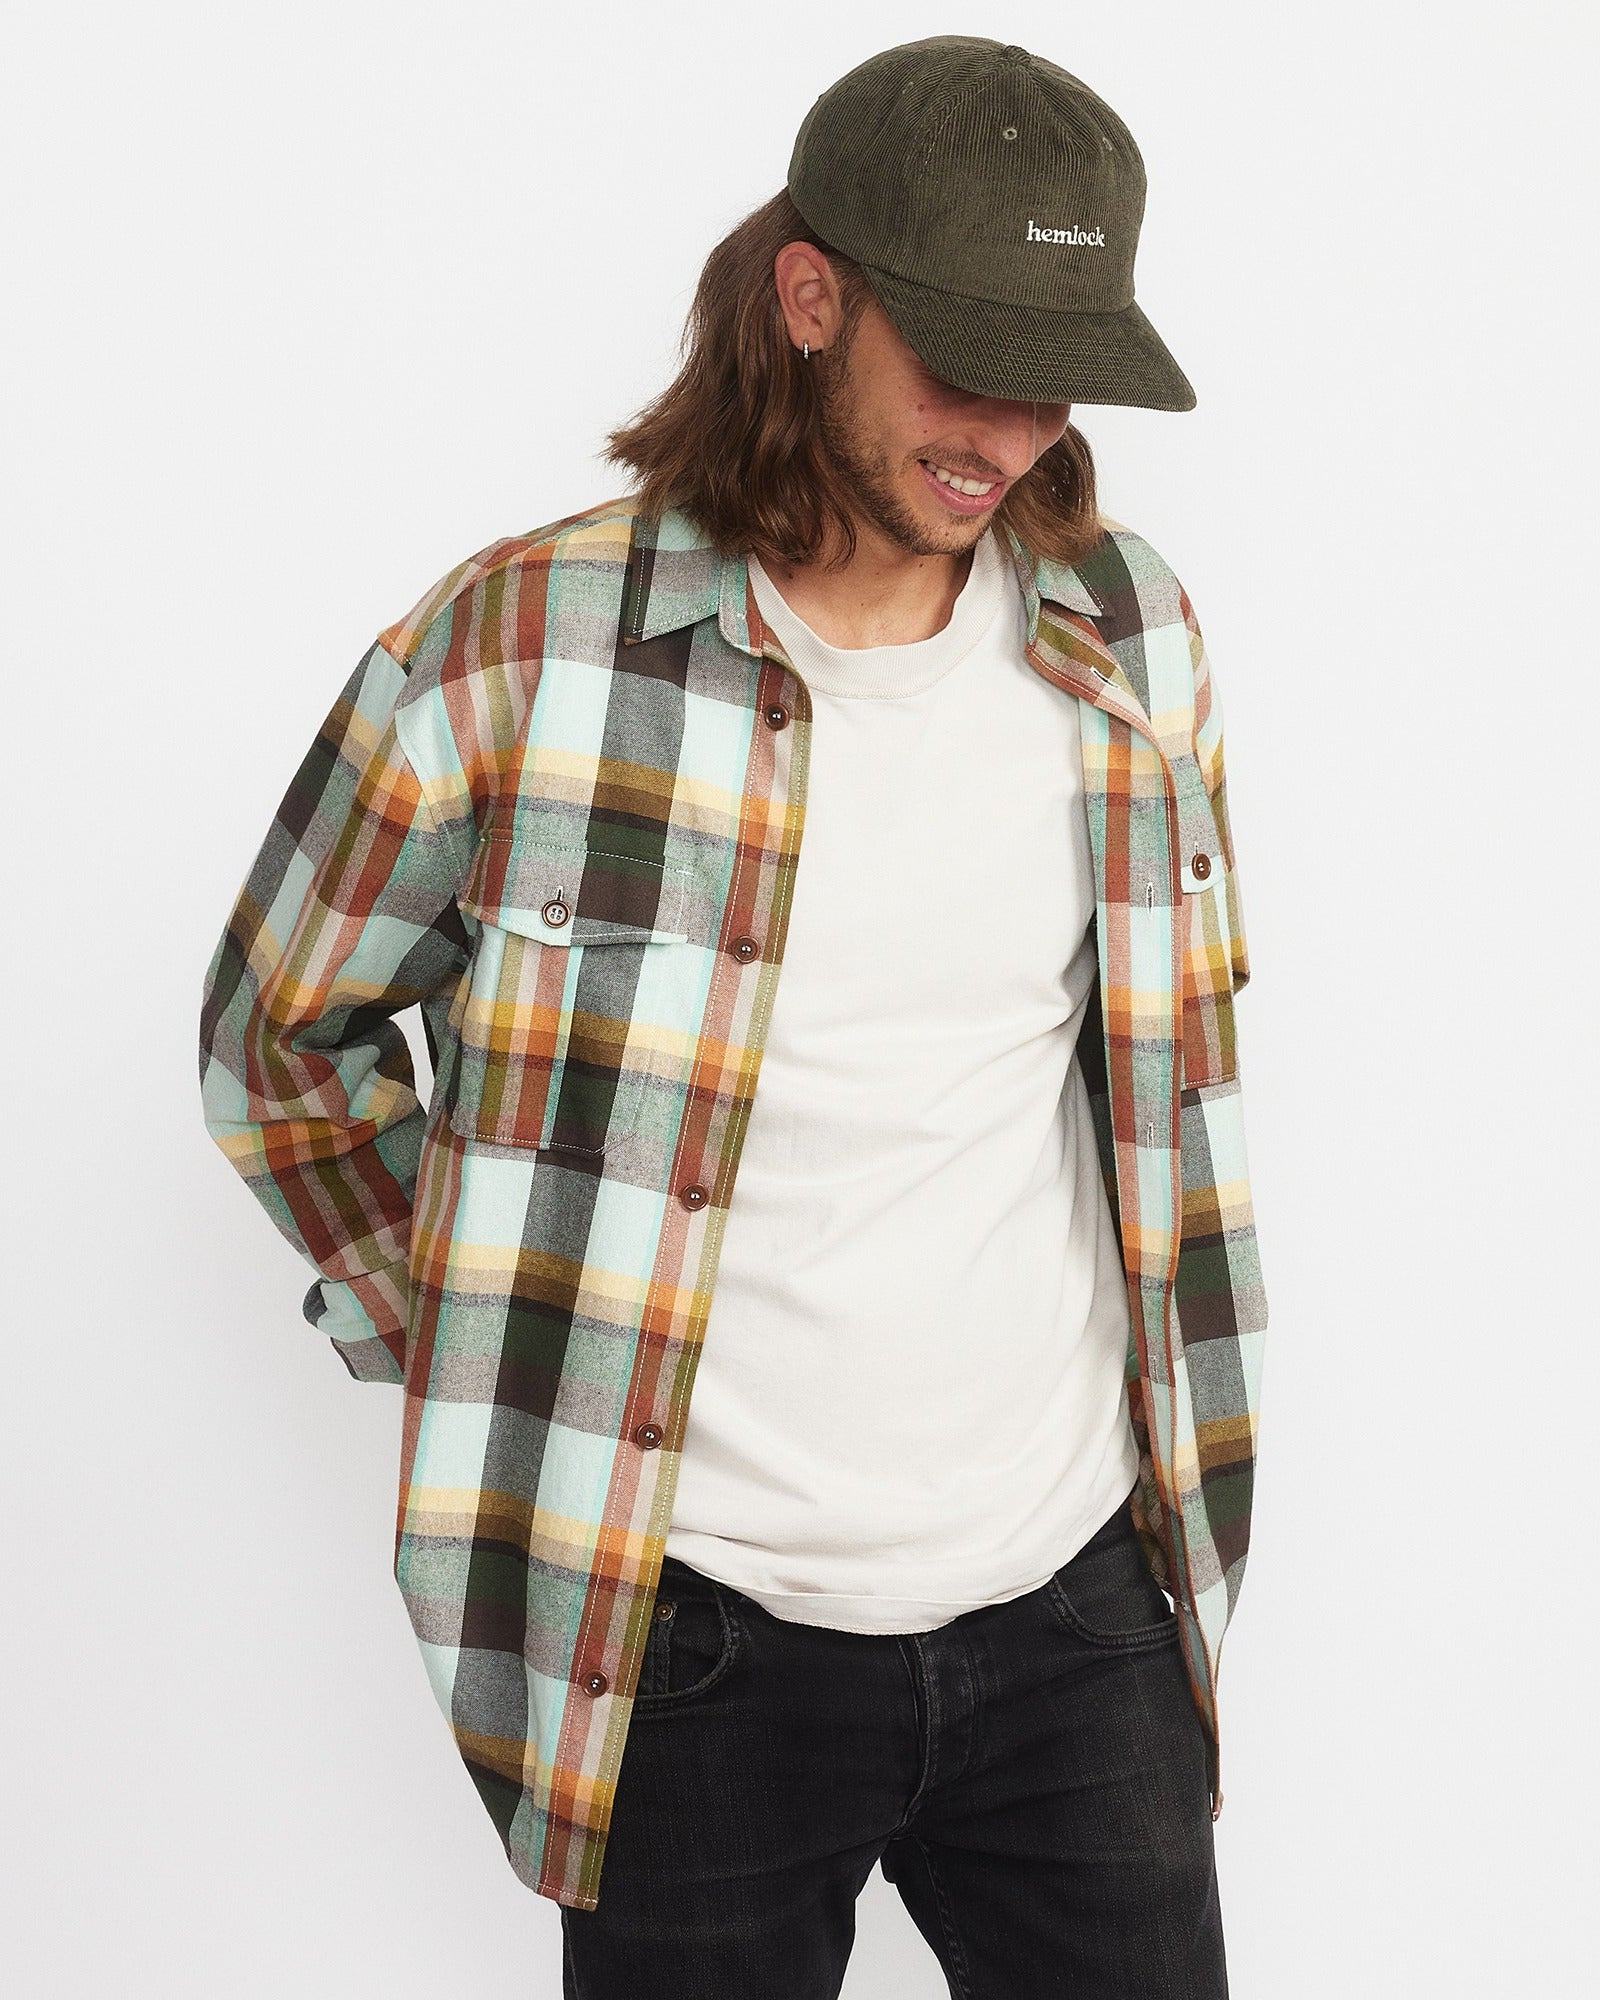 Wesley 5 Panel Hat in Olive - undefined - Hemlock Hat Co. Ball Caps